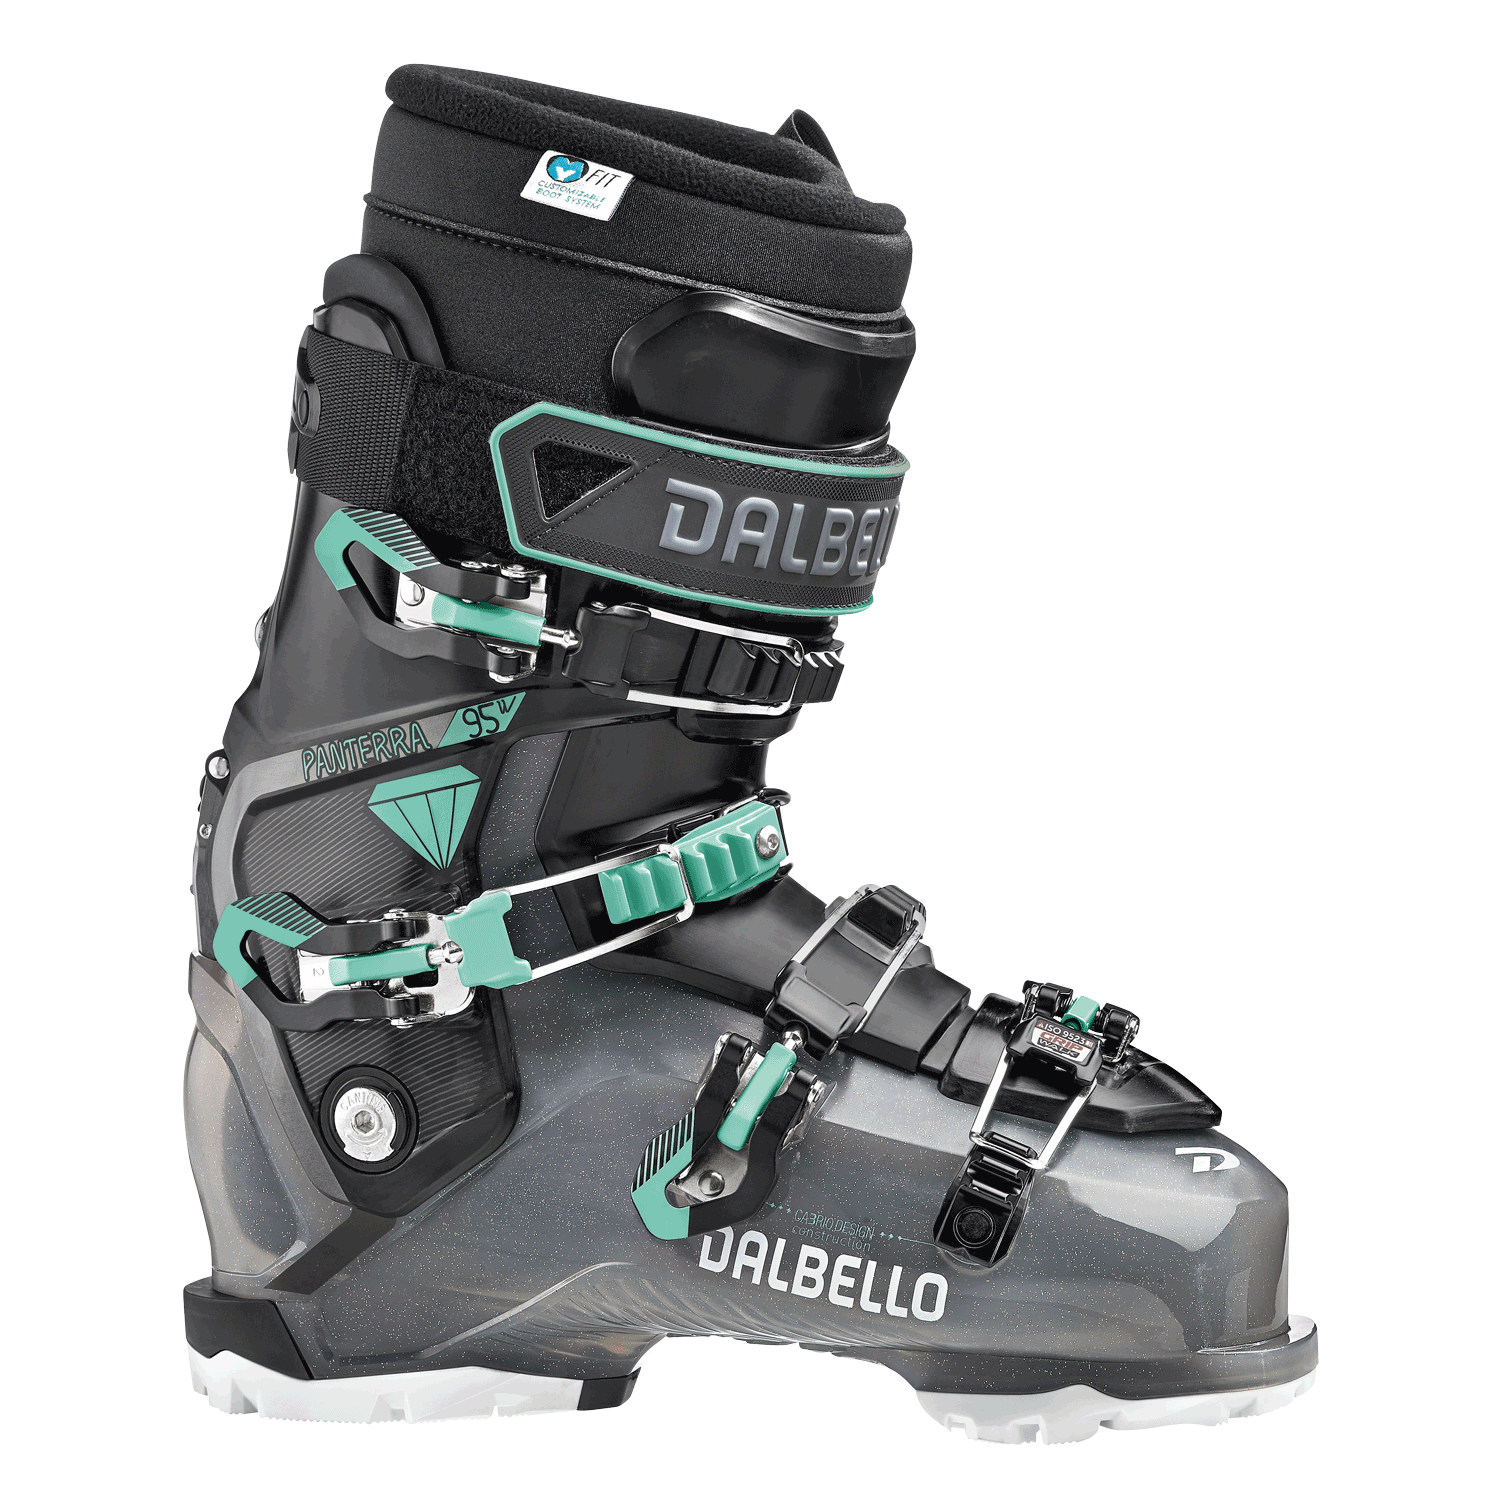 Image 0 of DALBELLO - PANTERRA 95 W ID GW BOOTS, 27.5 only - 2021